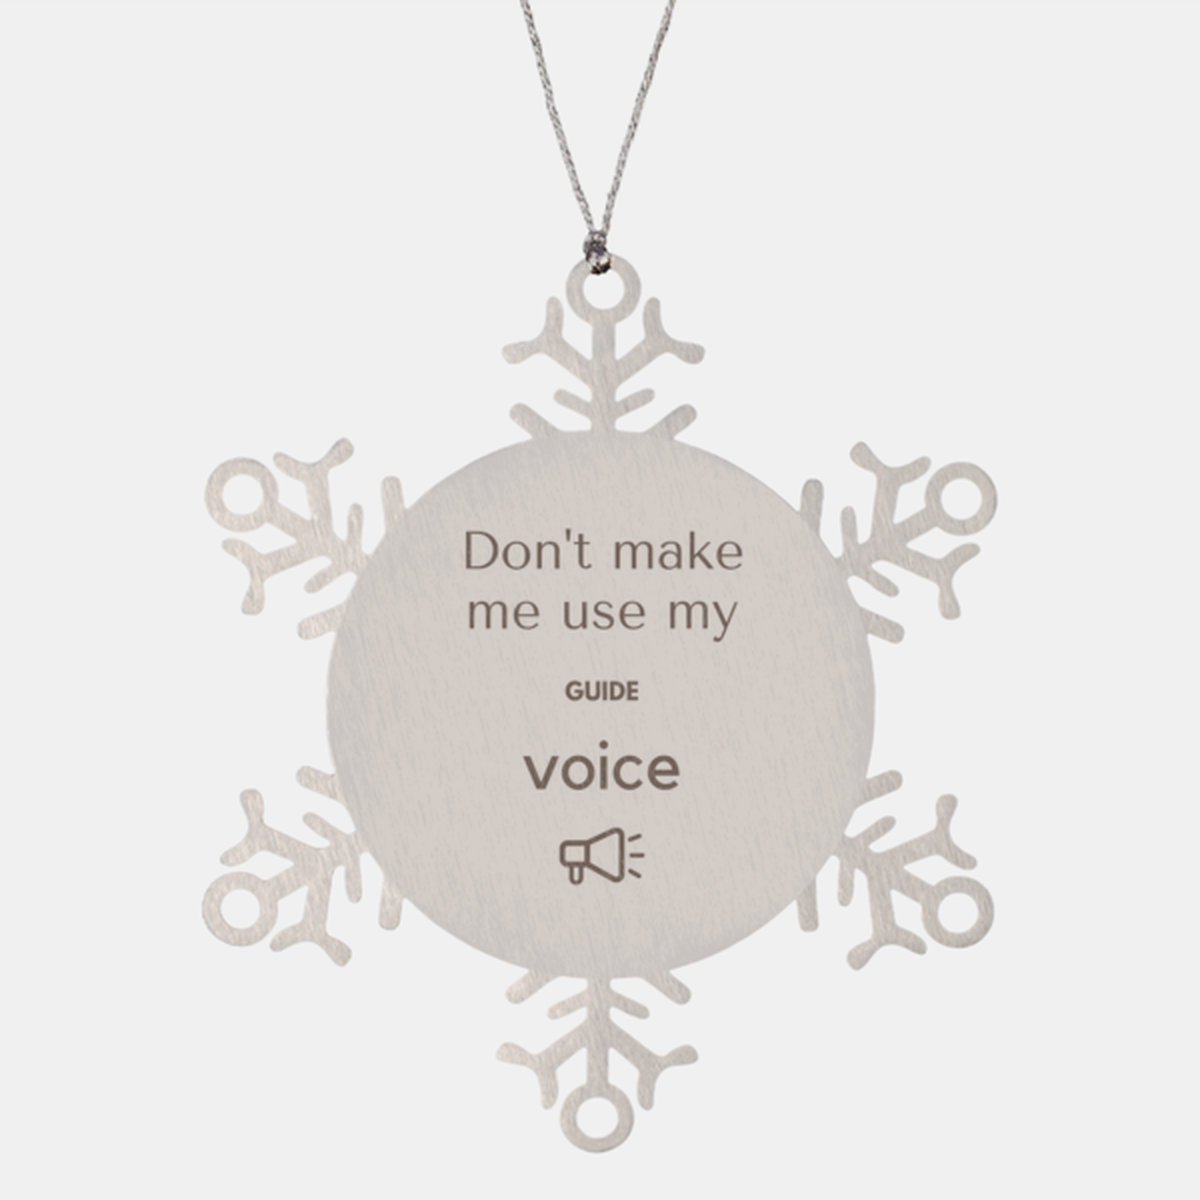 Don't make me use my Guide voice, Sarcasm Guide Ornament Gifts, Christmas Guide Snowflake Ornament Unique Gifts For Guide Coworkers, Men, Women, Colleague, Friends